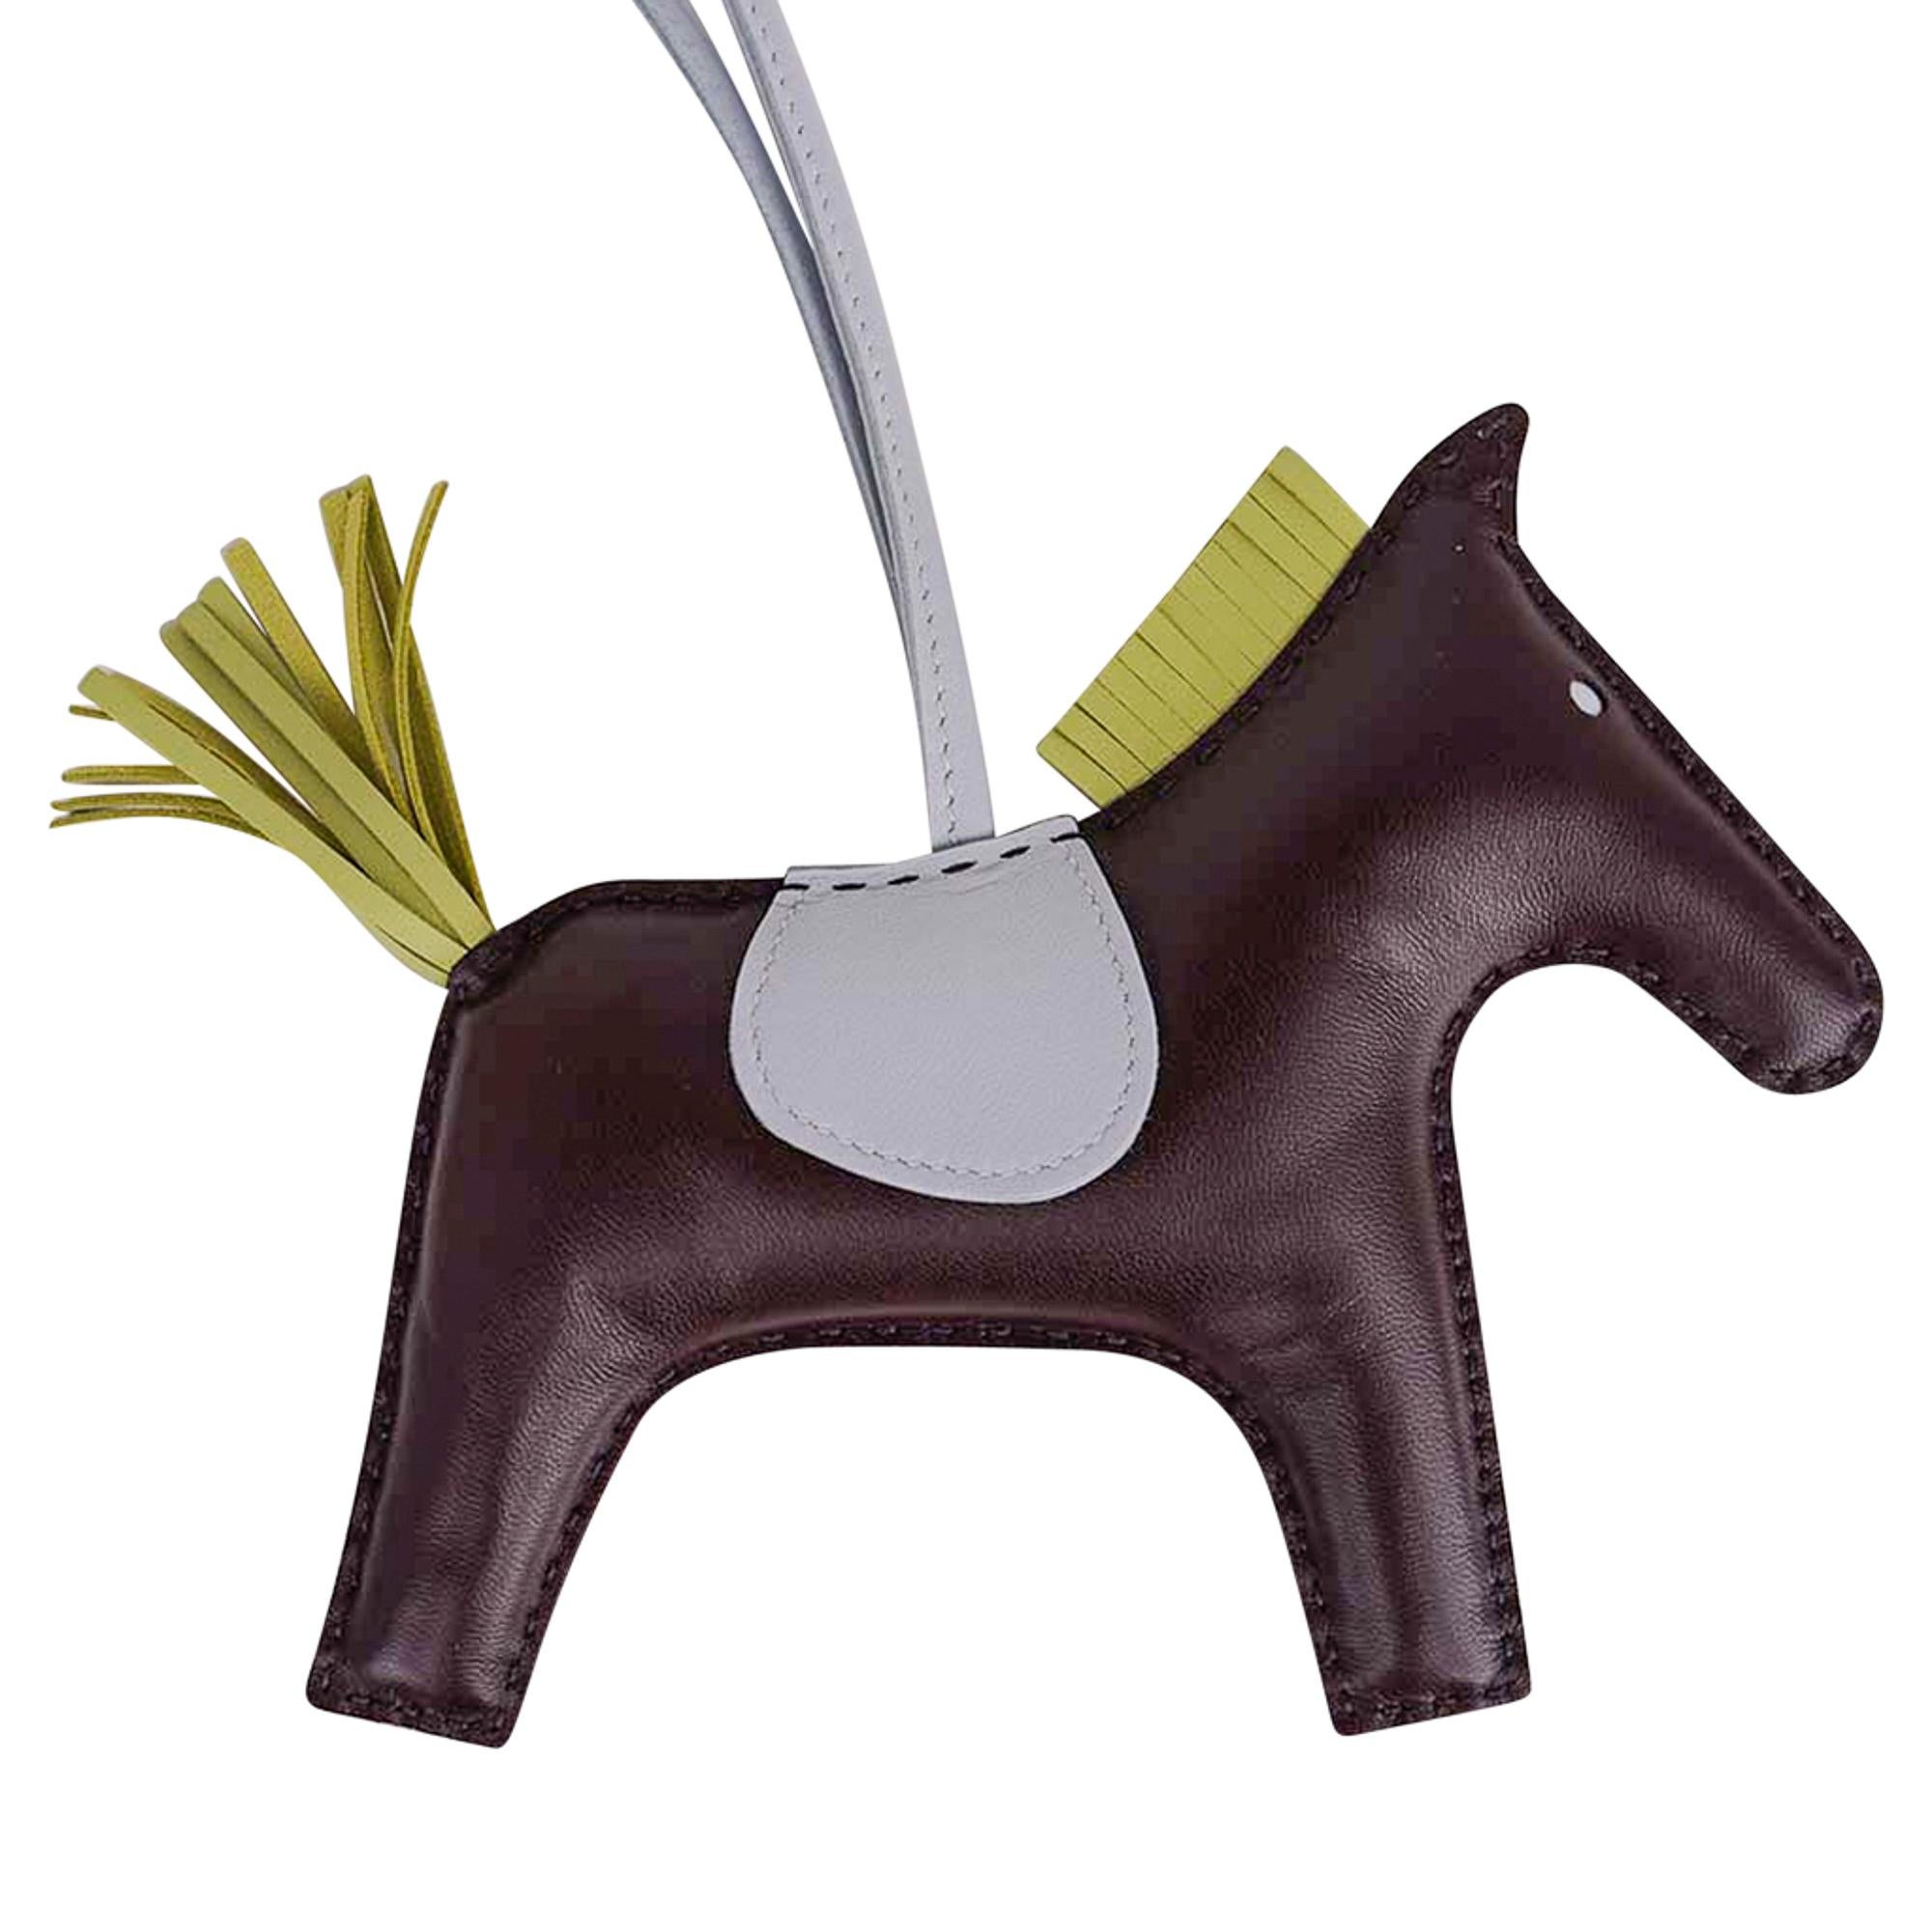 Mightychic offers a guaranteed authentic Hermes Grigri Rodeo GM horse bag charm featured in Rouge Sellier, Bleu Brume
and Jaune Bourgeon.
Charming and playful she easily adorns a myriad of bag colors in your fabulous collection.
Skin is lamb